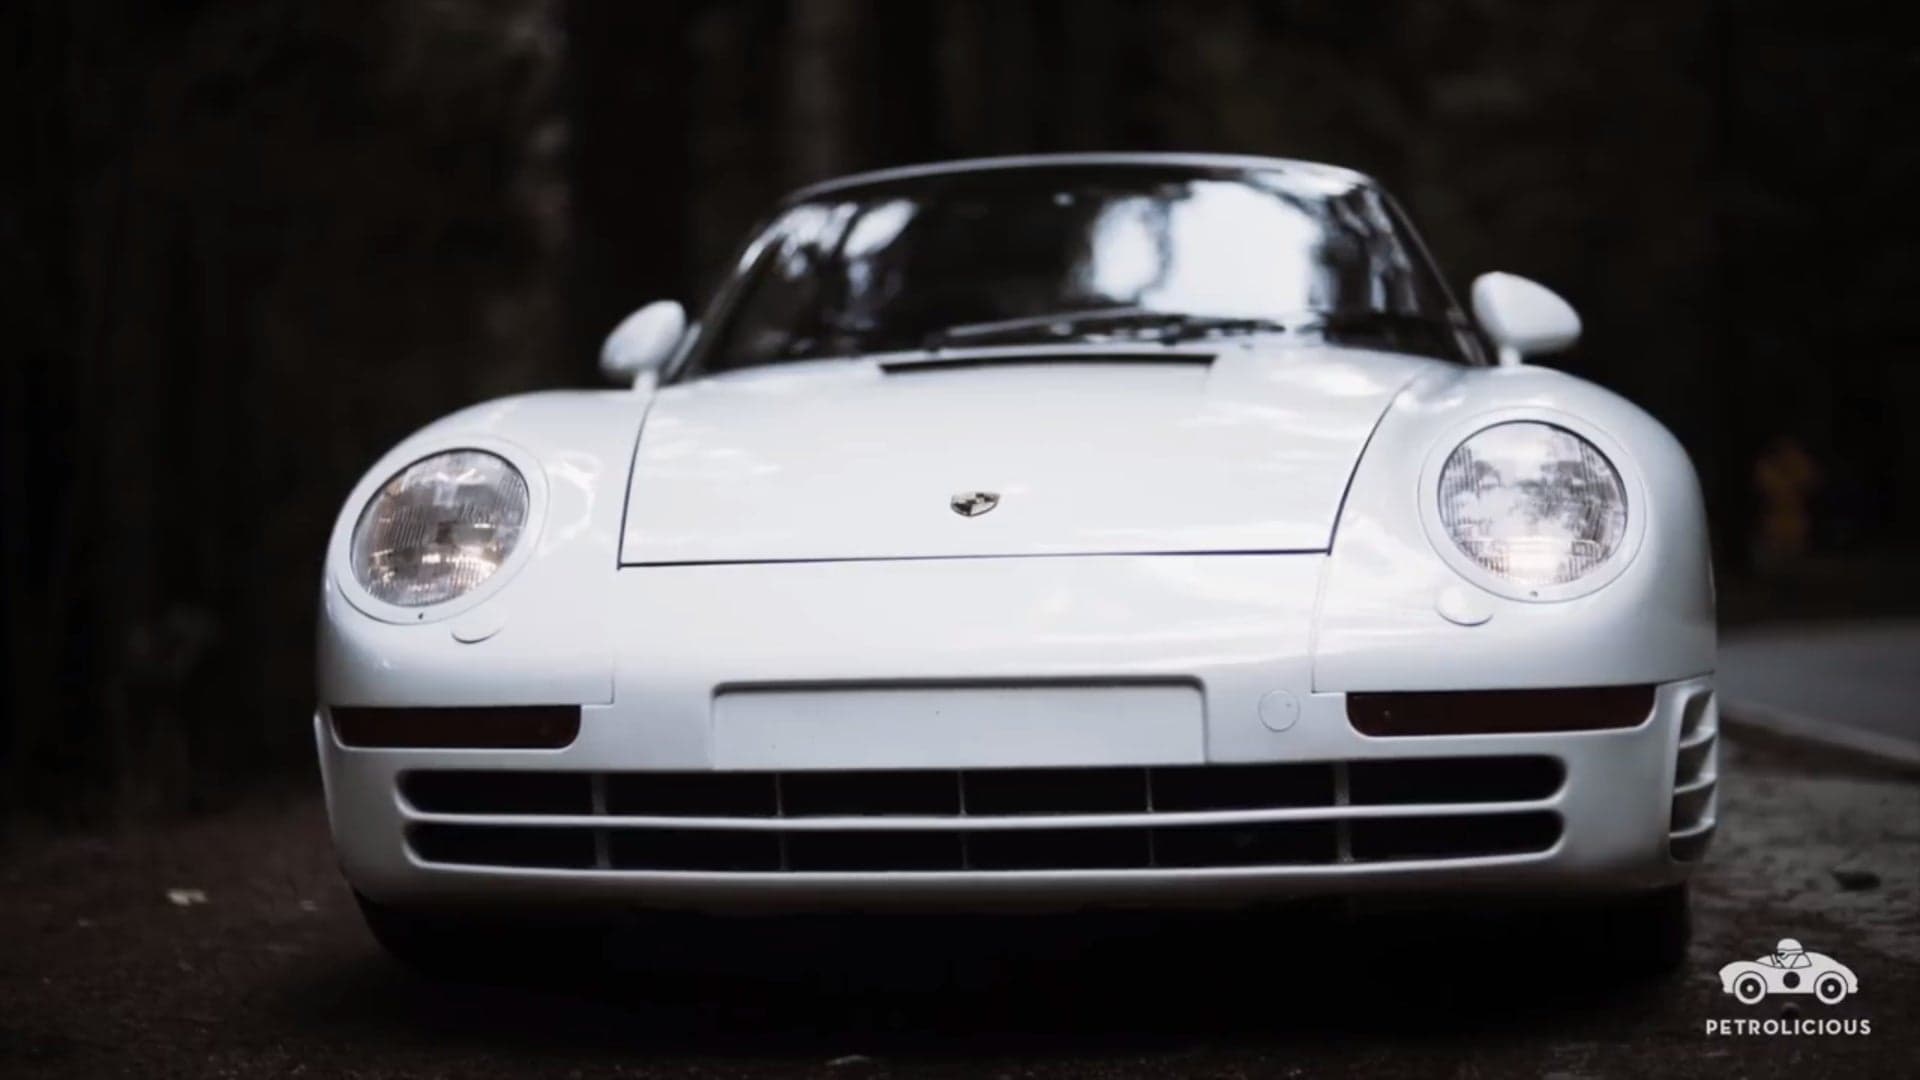 Find out How Bruce Canepa Made the Legendary Porsche 959 Street Legal in the US